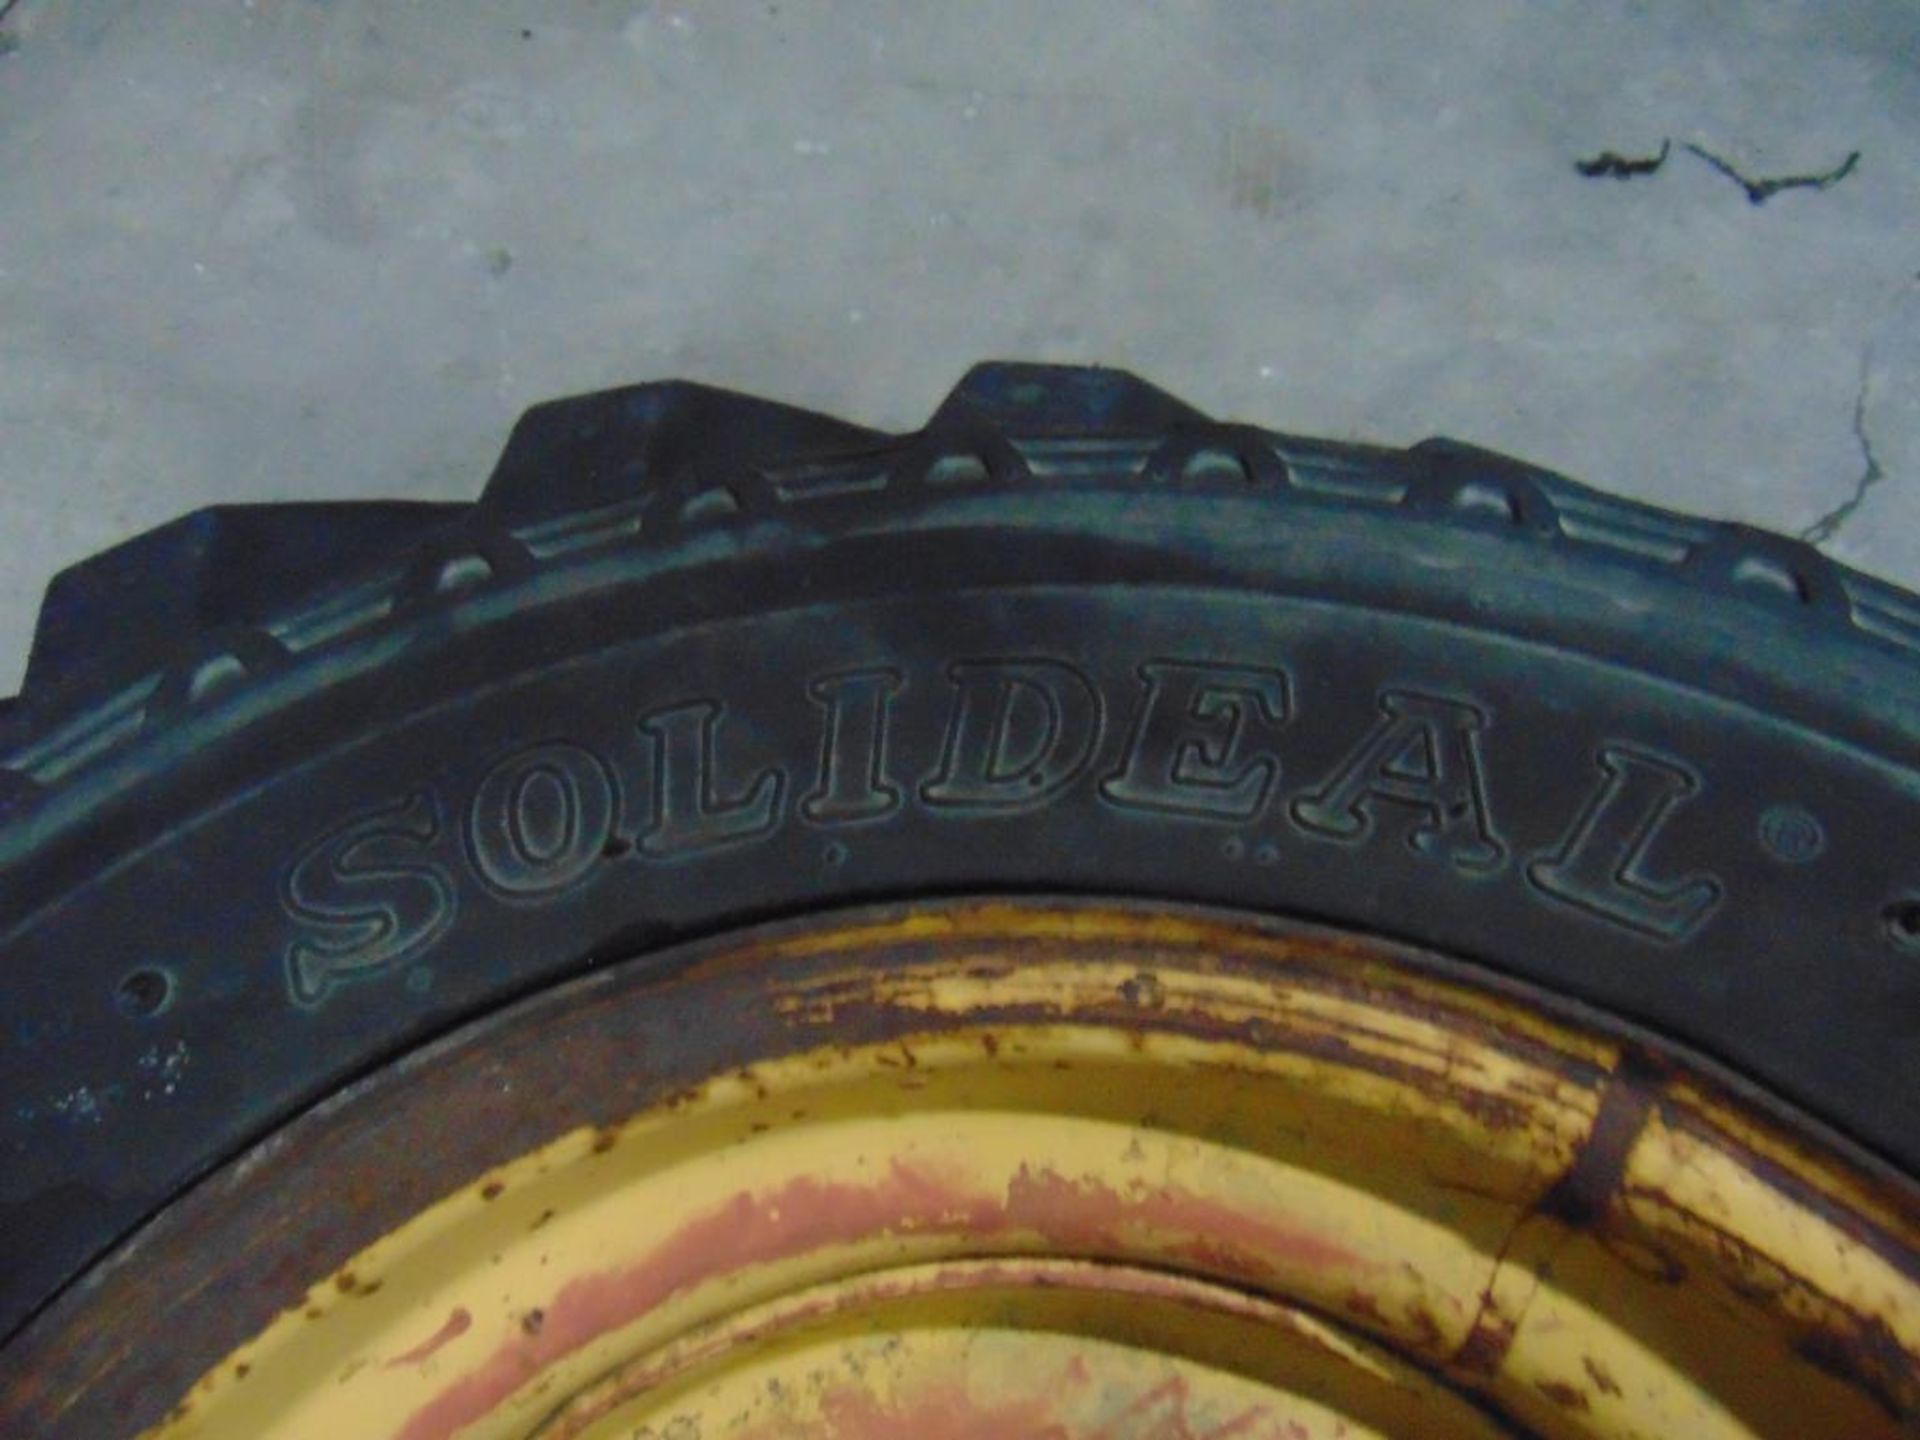 Lot of Tires and Rims* - Image 17 of 24